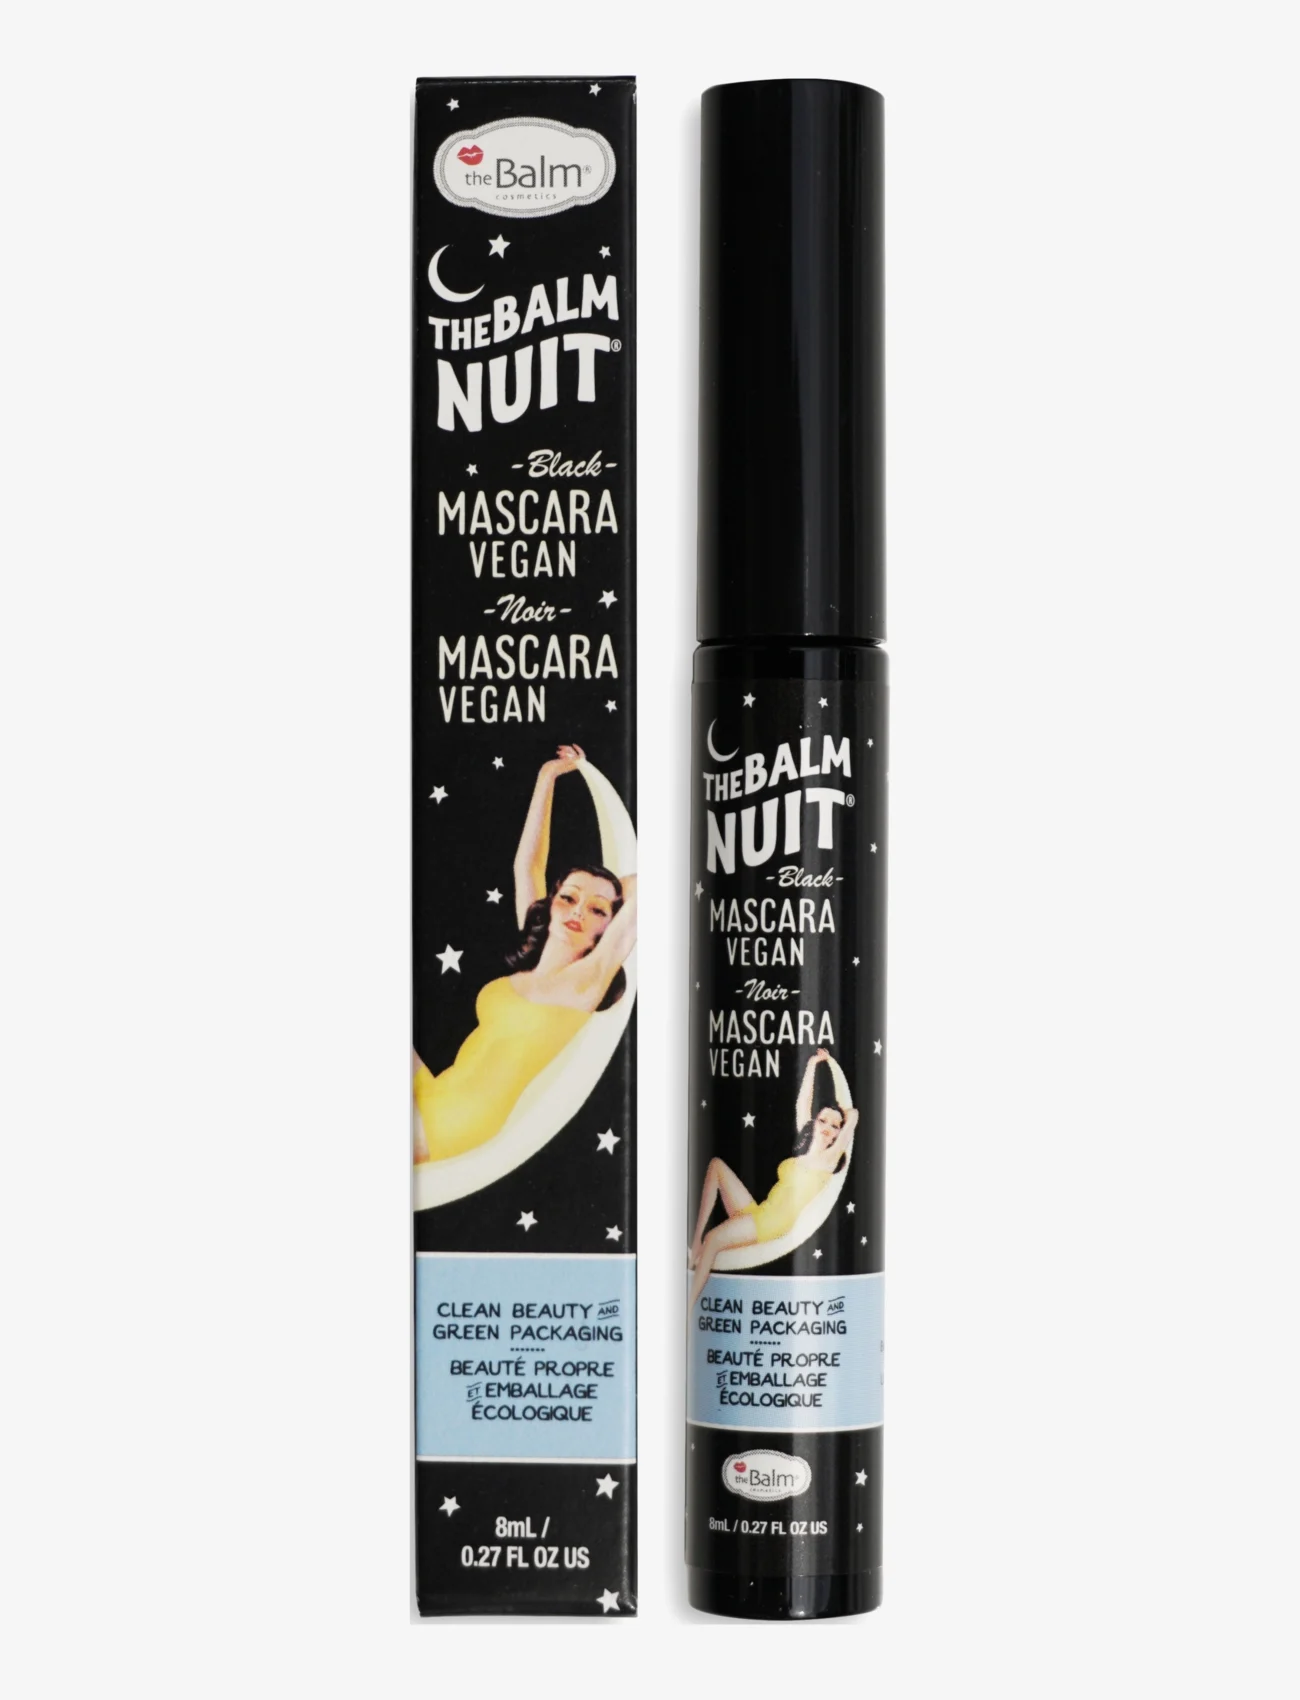 The Balm - theBalm Nuit Mascara - party wear at outlet prices - black - 0